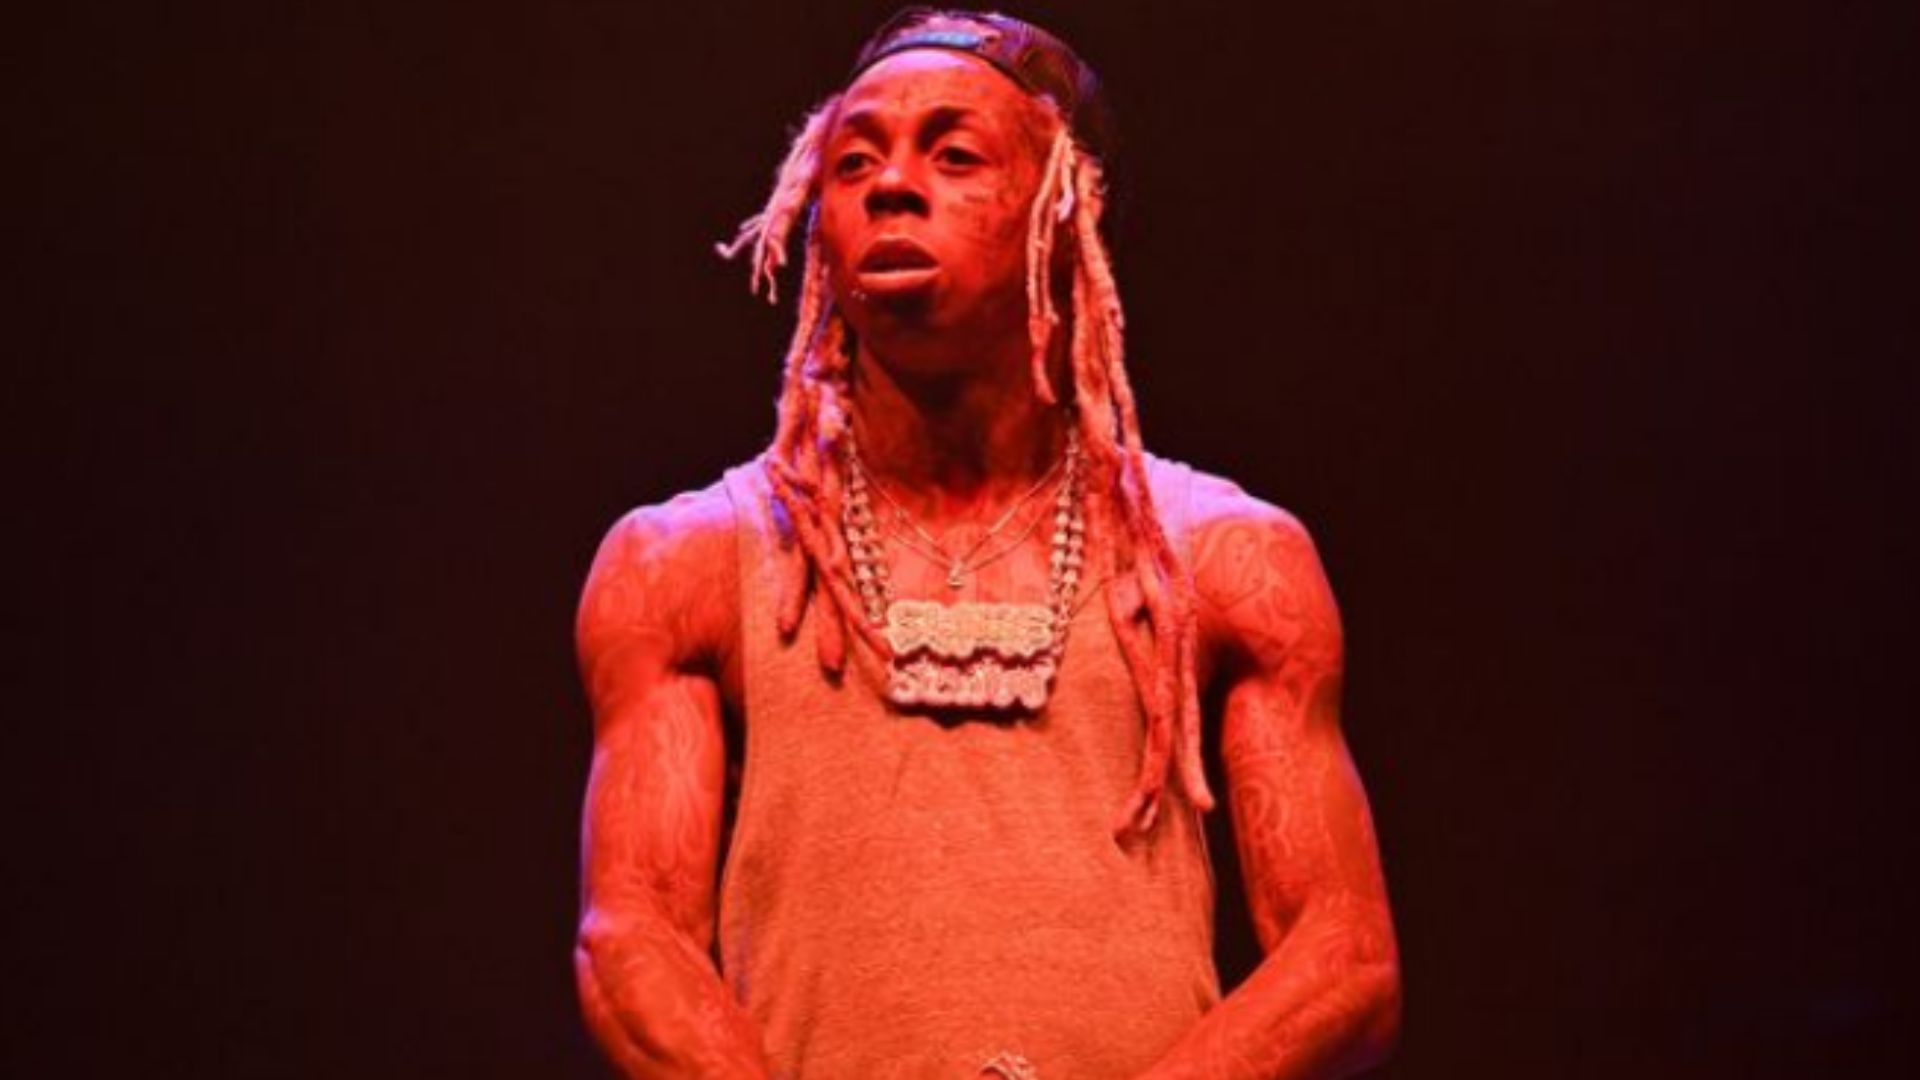 Lil Wayne denied access to UK for festival performances